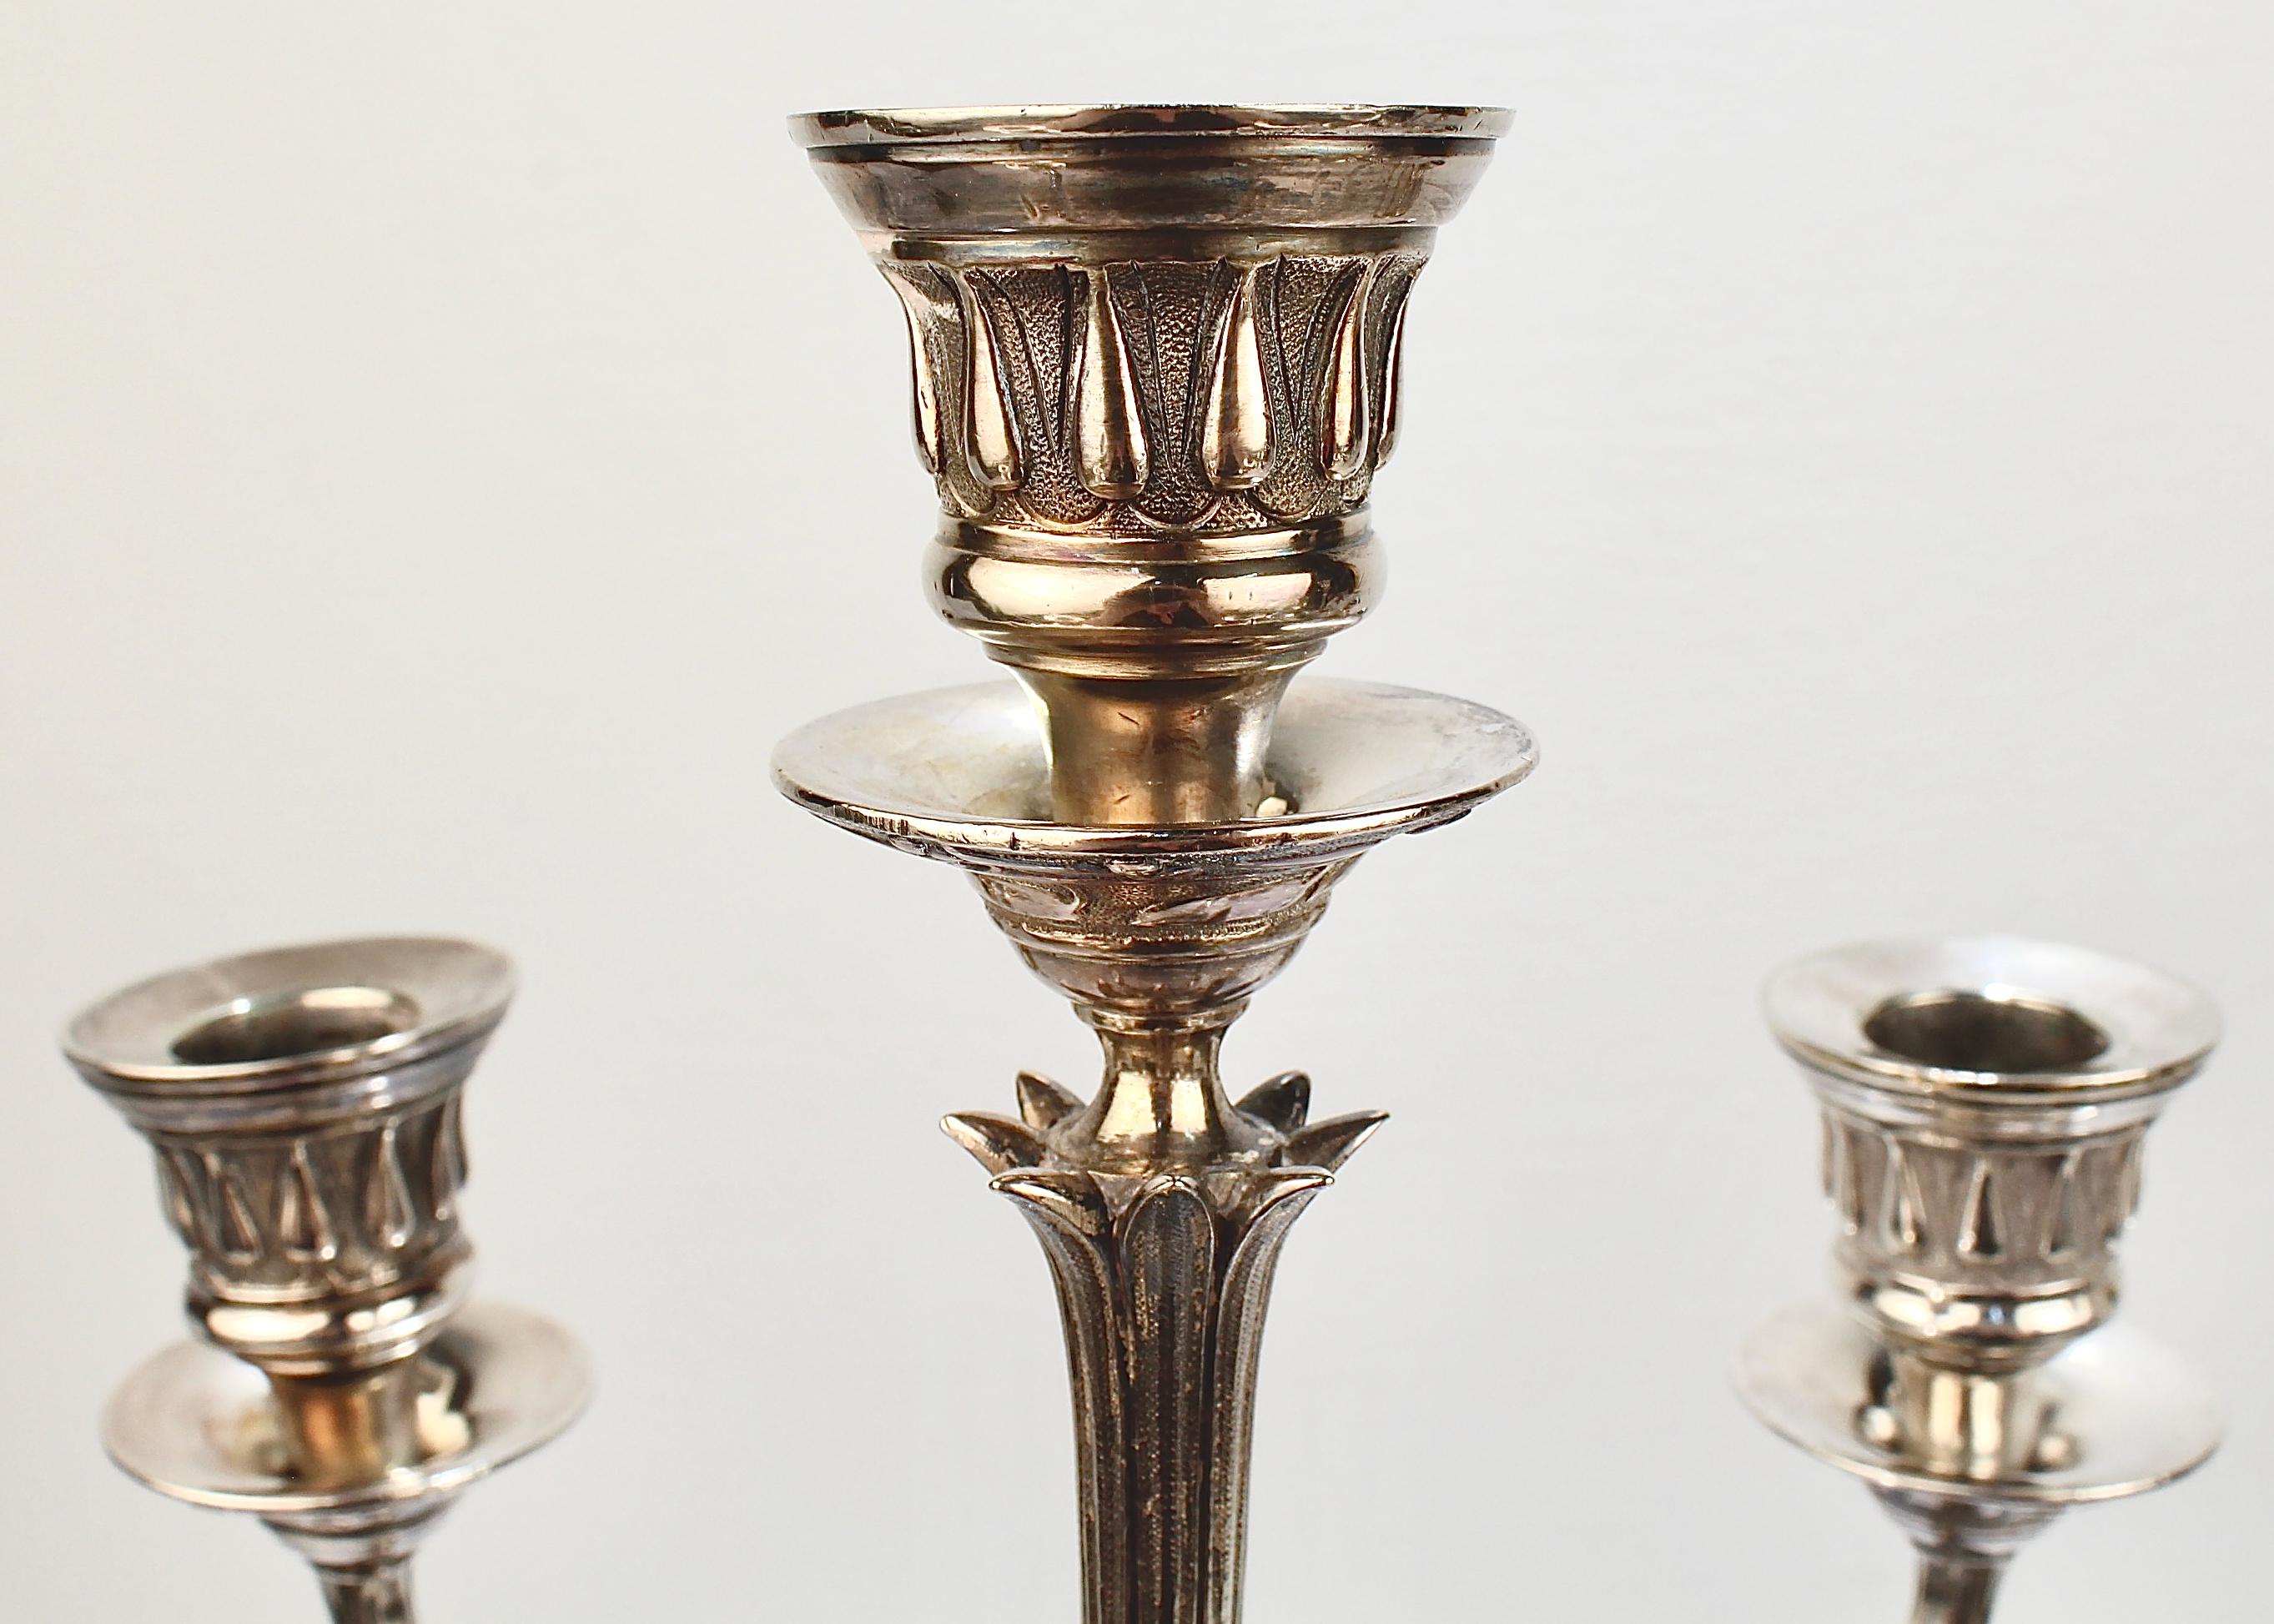 Pair of Elkington & Co Neoclassical Revival Silver Plated Five-Light Candelabra For Sale 6